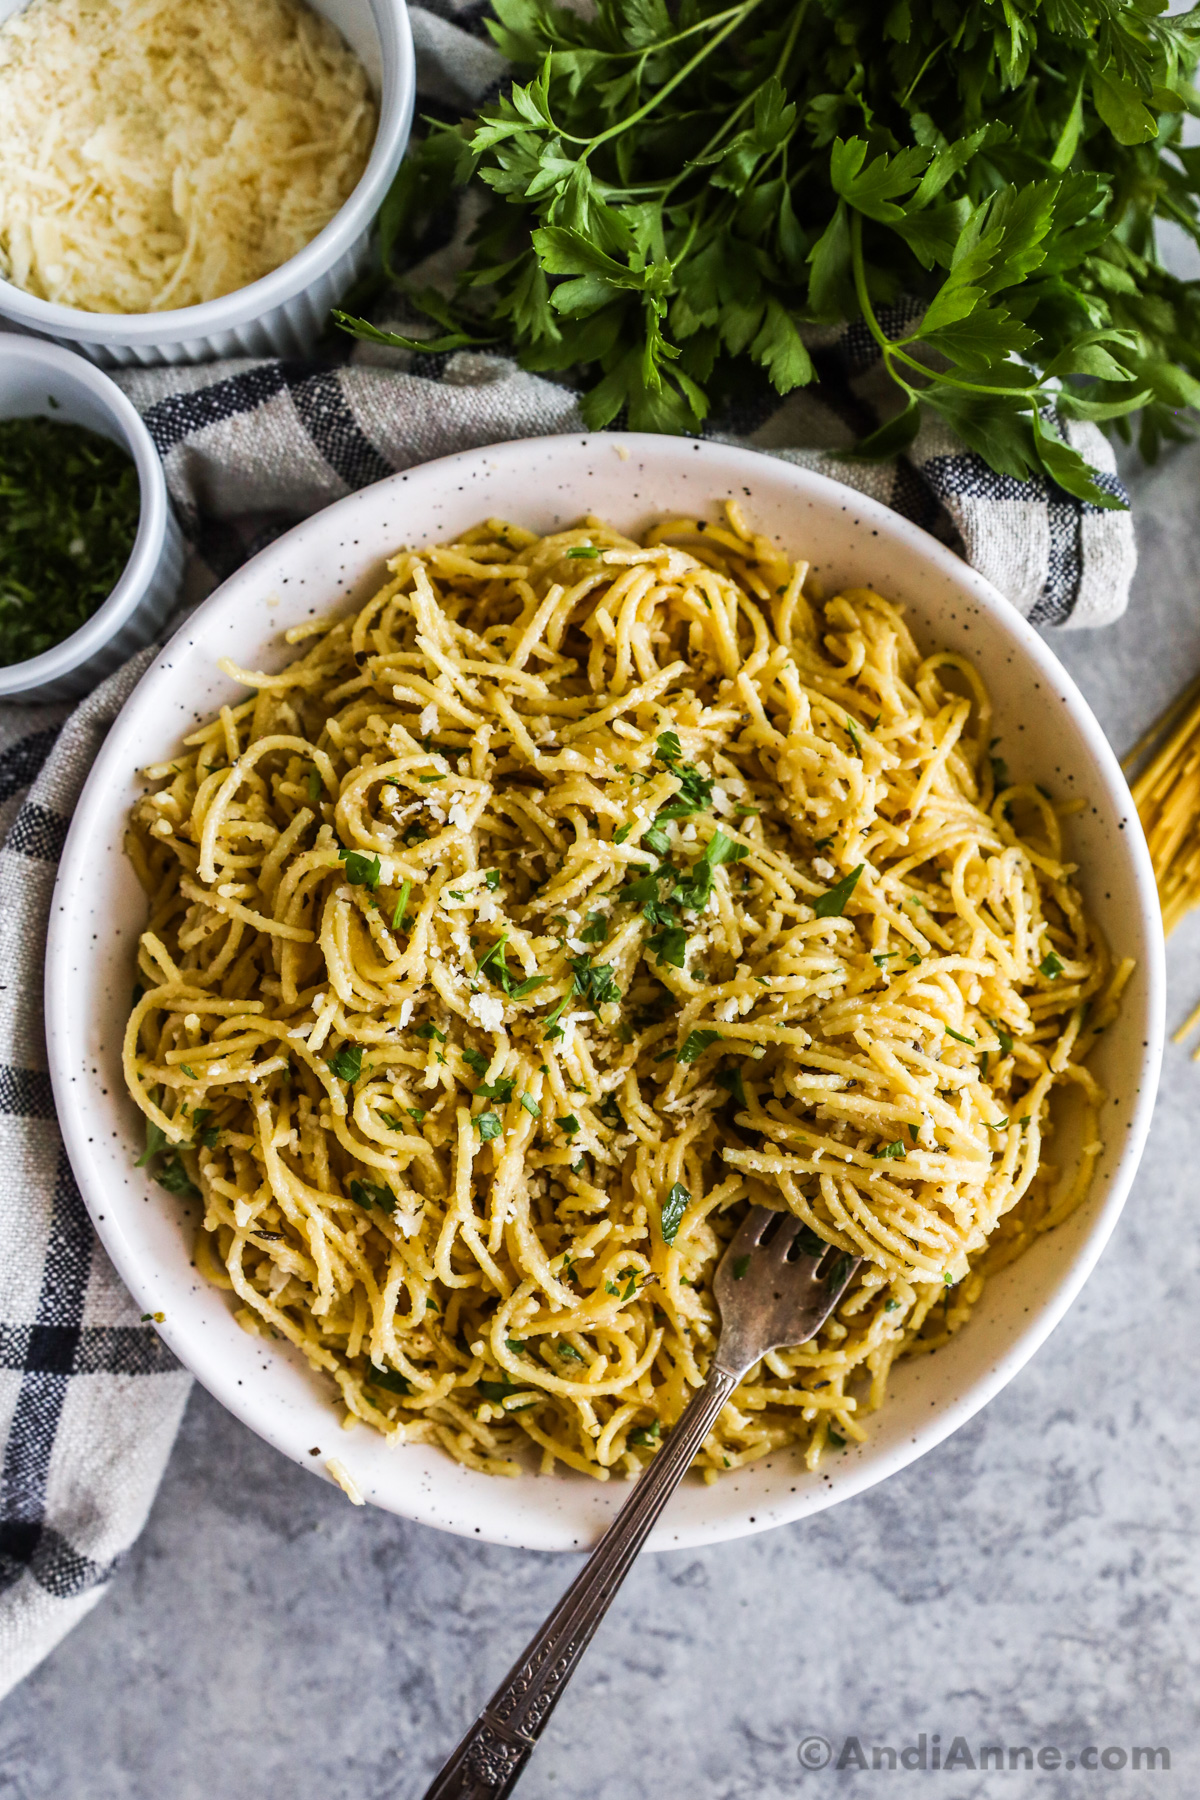 A bowl of garlic parmesan pasta sprinkled with parsley and a fork.